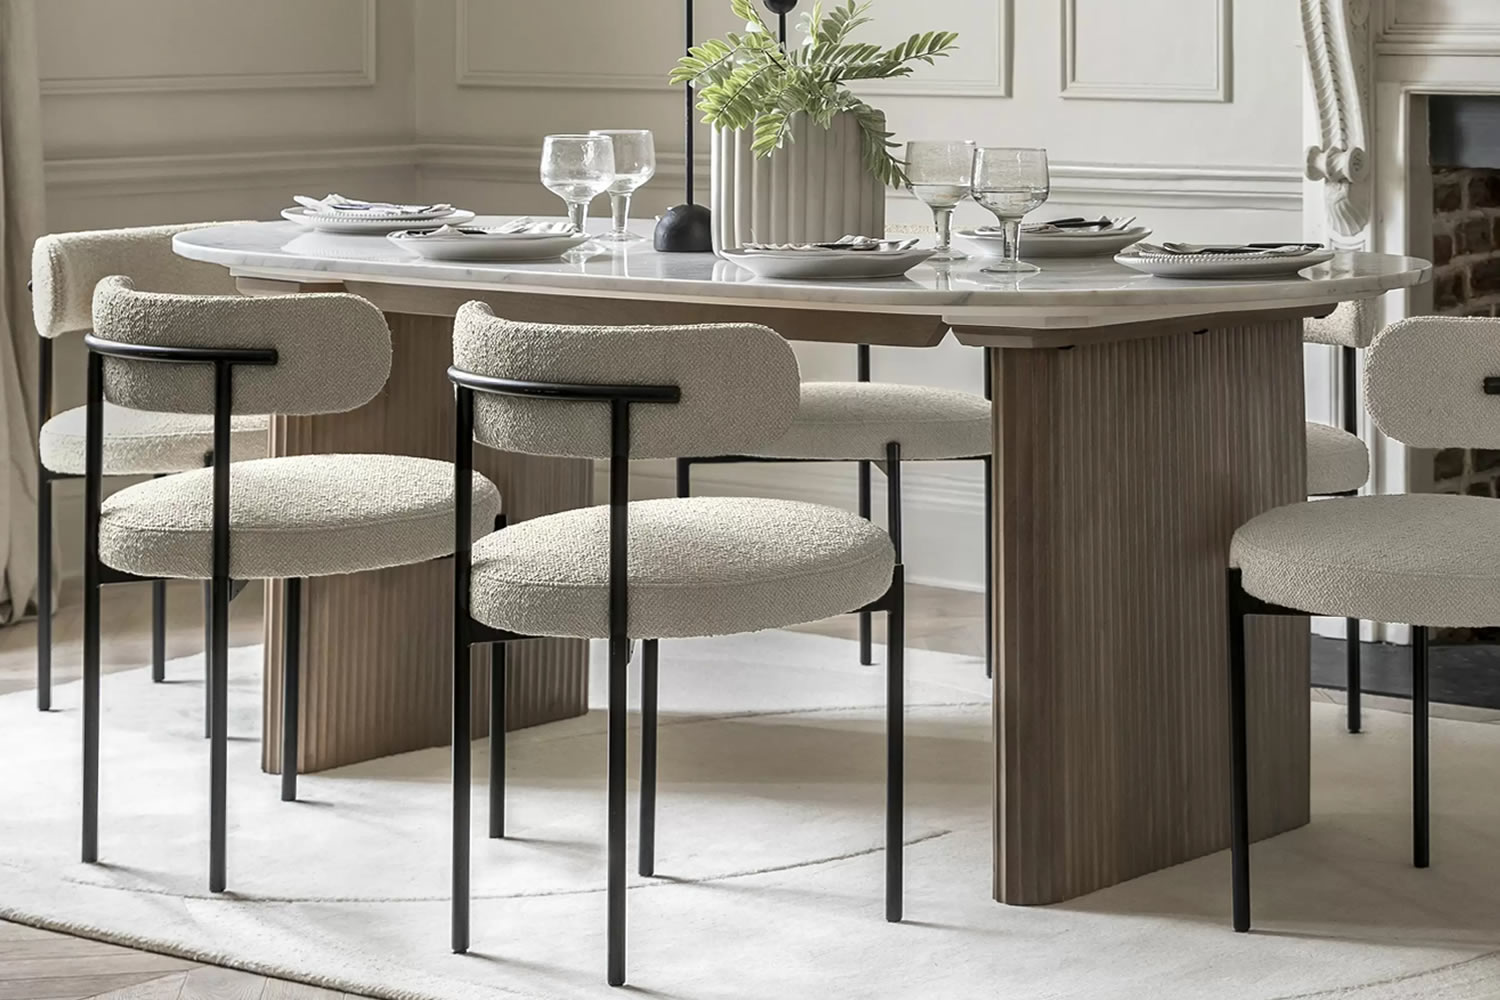 View Marmo Dining Table Crafted From Solid Mango Wood Accommodates Up to 8 People GreyVeined White Carrera Marble Top Classy Ribbed Wooden Legs information